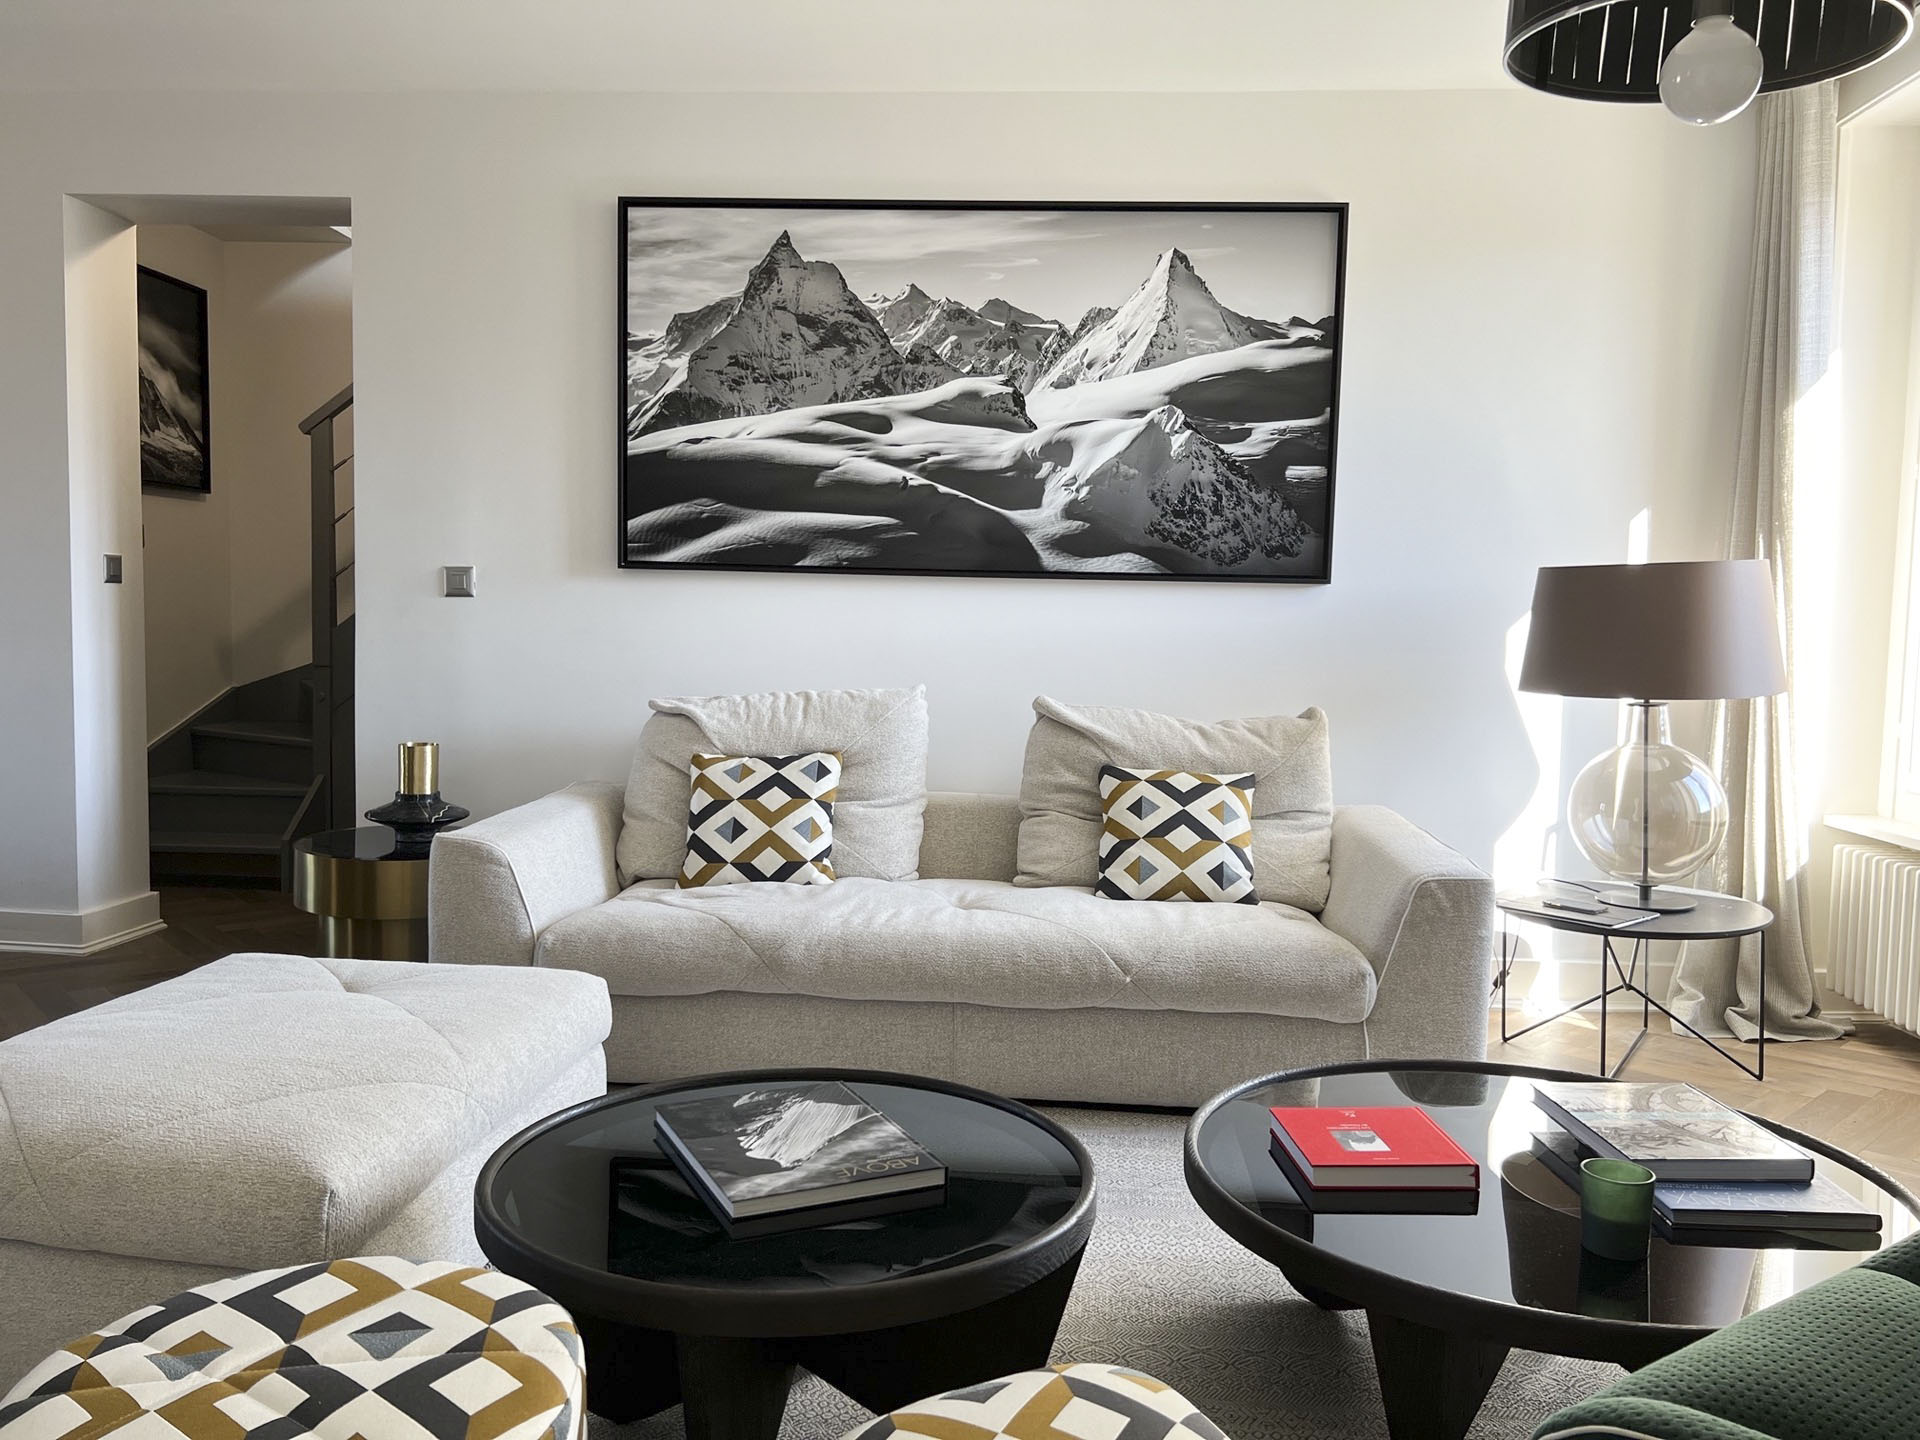 panoramic mountain photo large size - interior wall decoration living room - black and white mountain photo